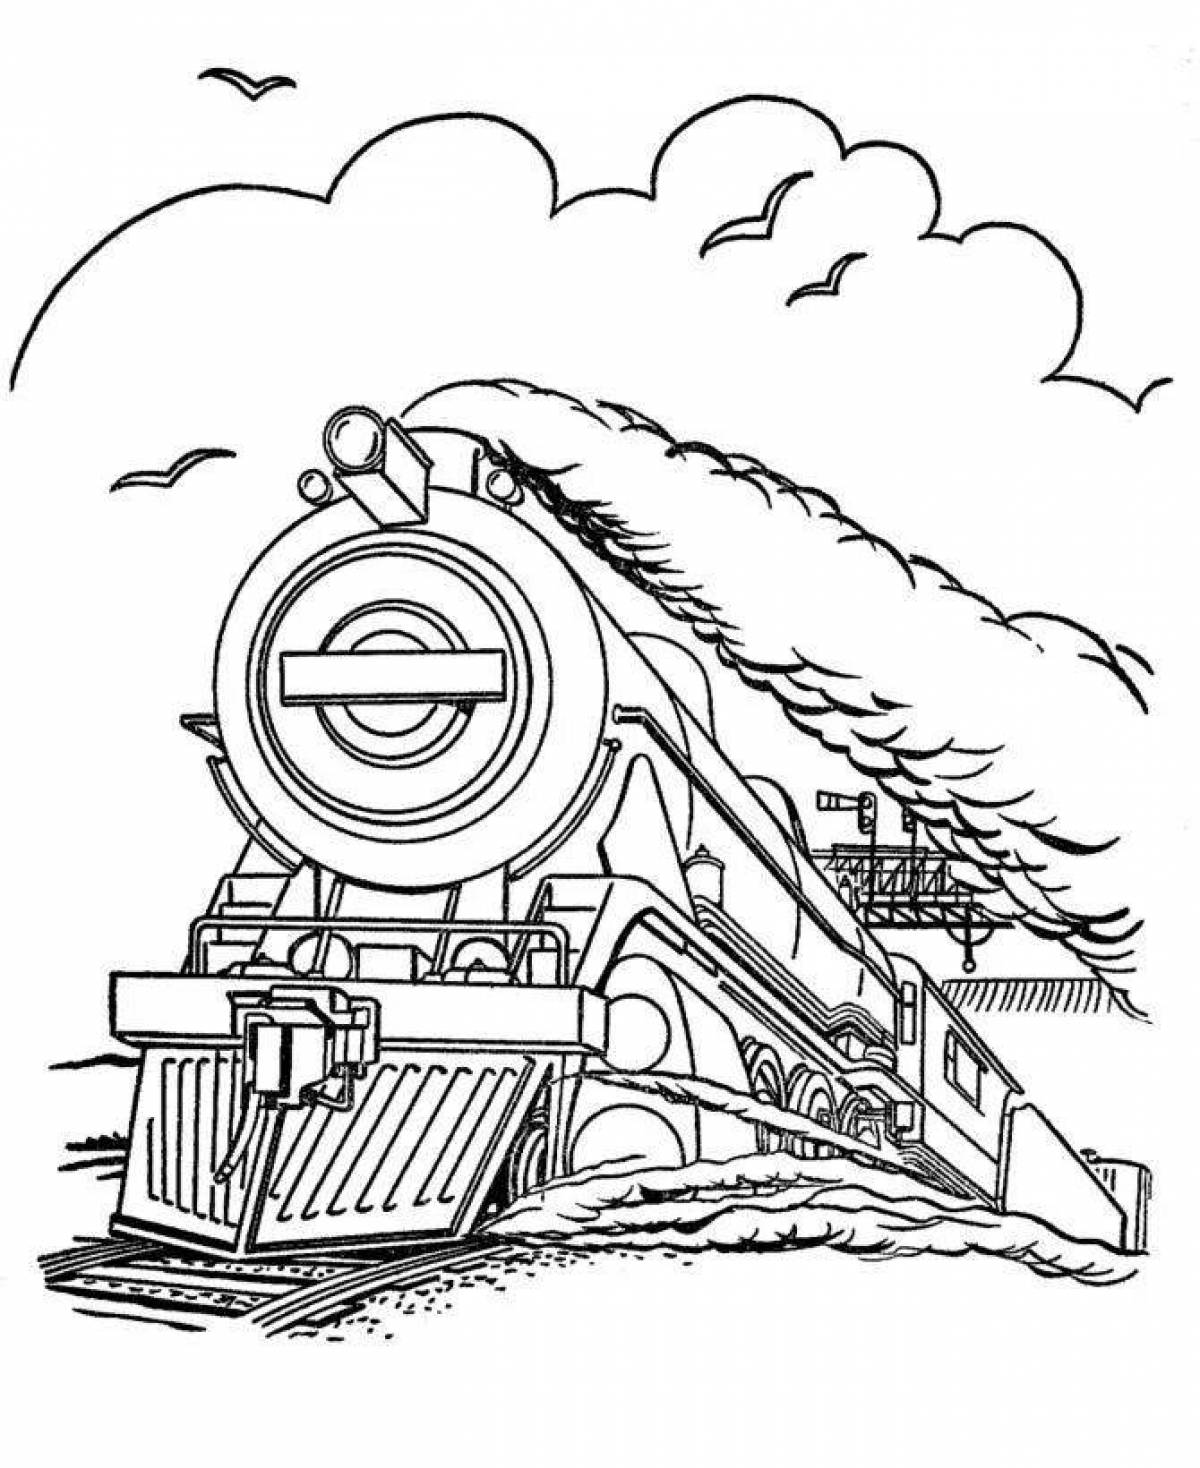 Exquisite military train coloring page